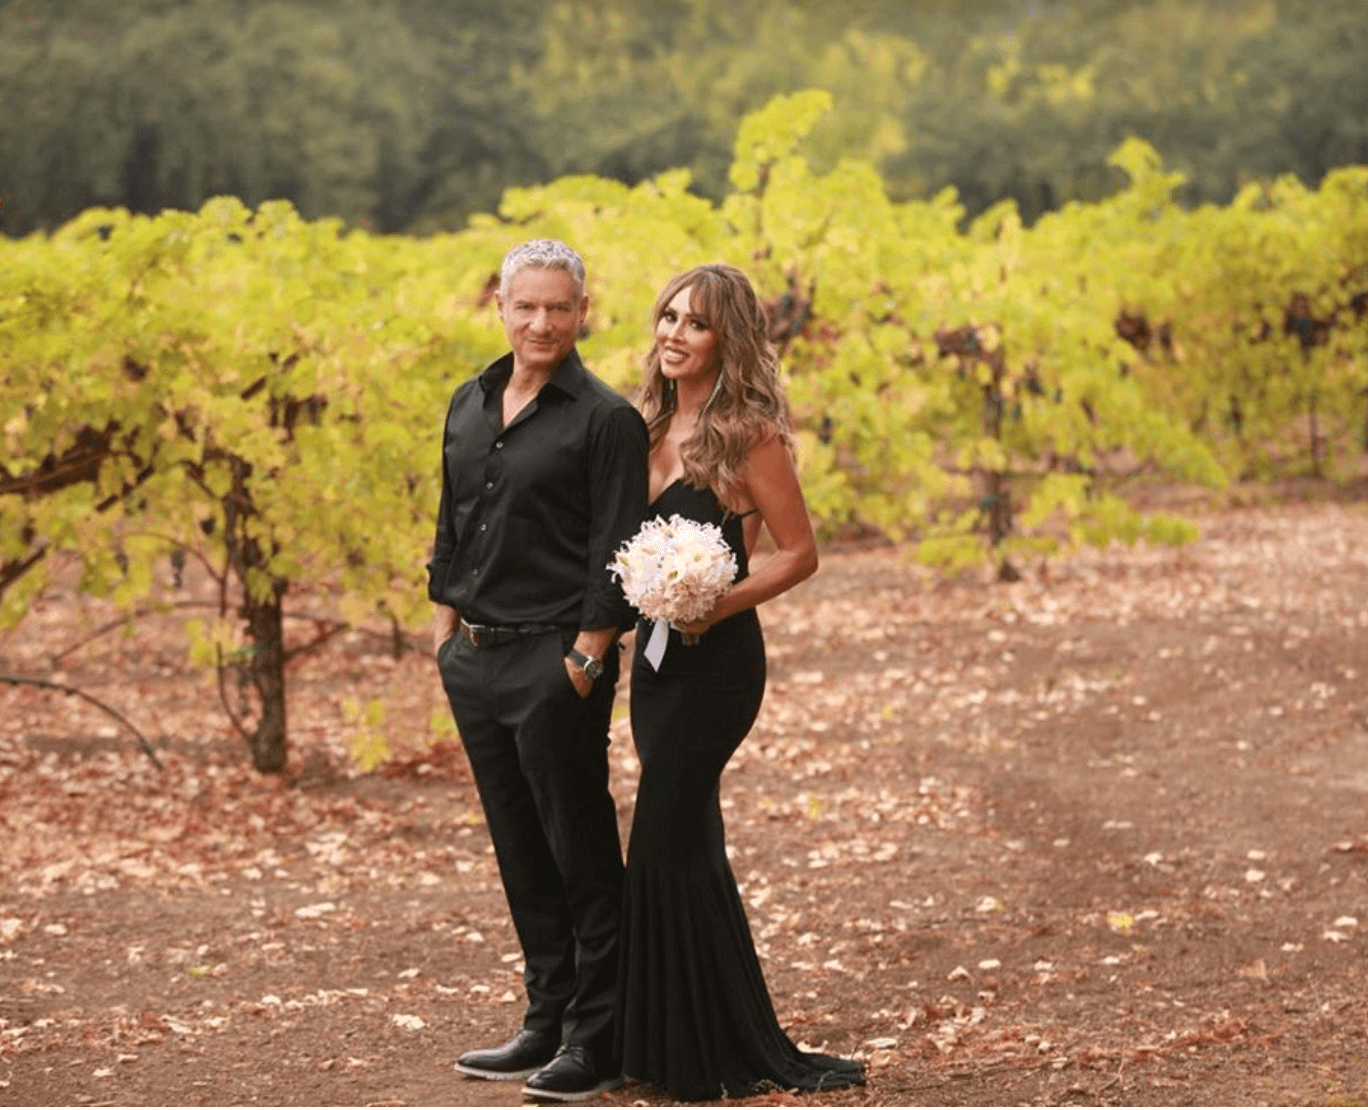 Kelly Dodd & Rick Leventhal Get Married In Napa, California!